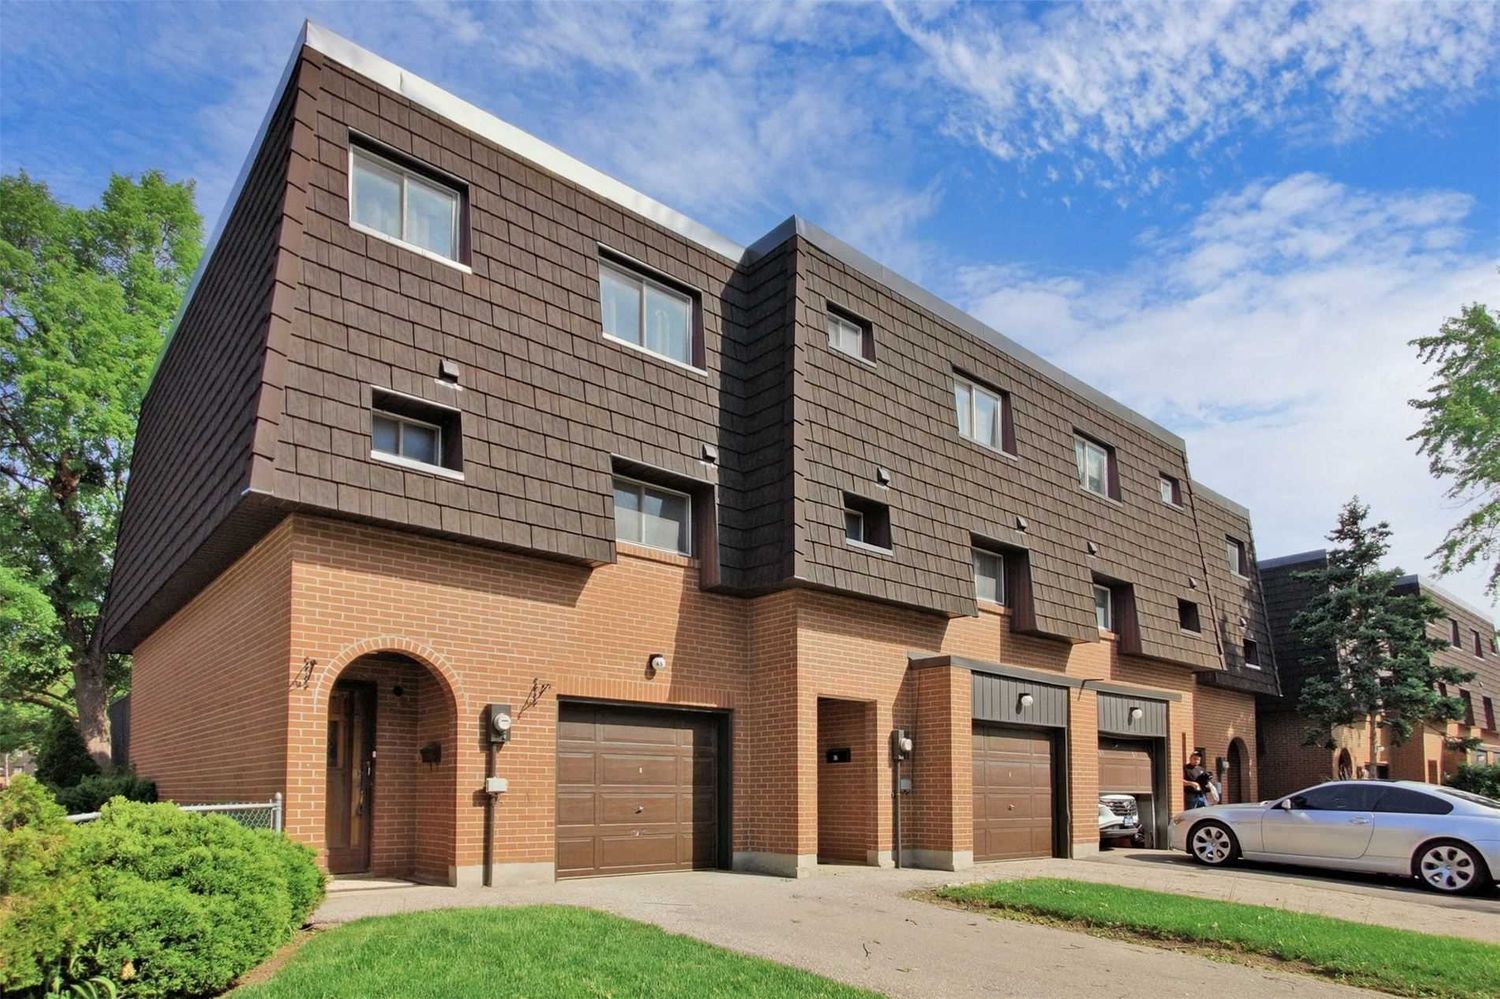 4-152 Darras Court. Darras Court Townhomes is located in  Brampton, Toronto - image #1 of 2